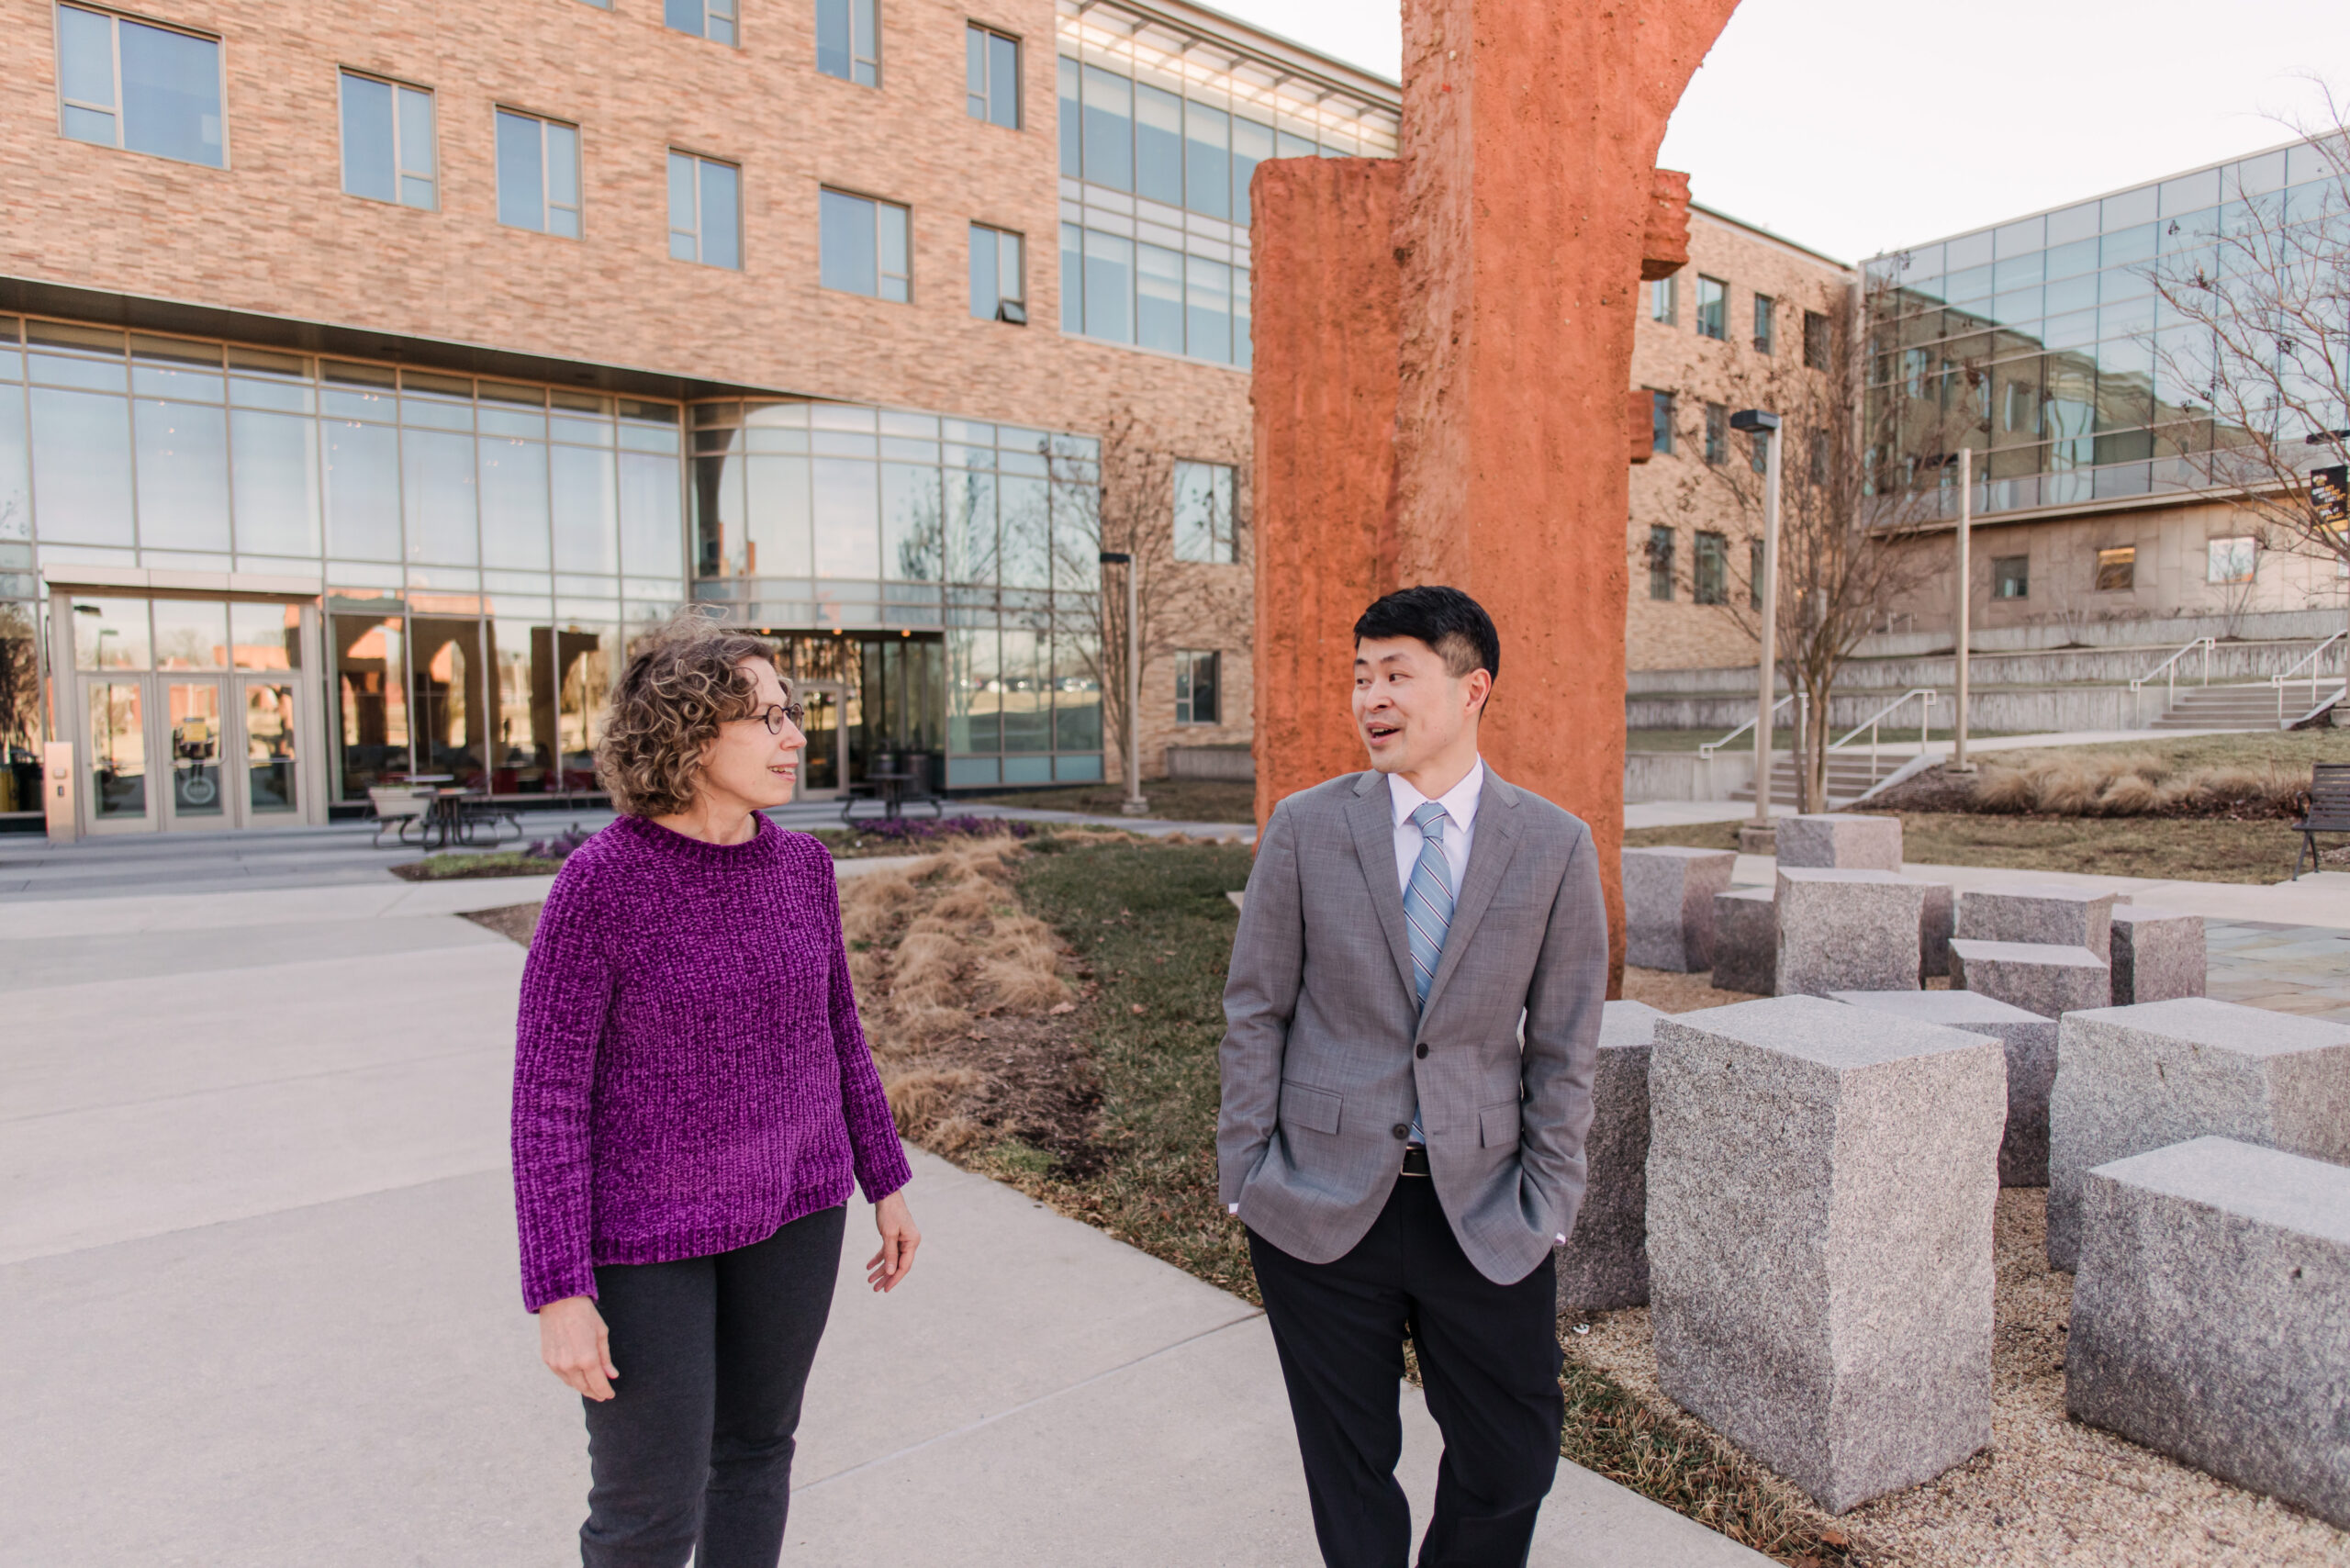 A woman in bright purple walks and talks next to a man in a suit jacket outside next to a sculpture. she is helping connect him to faculty funding and awards